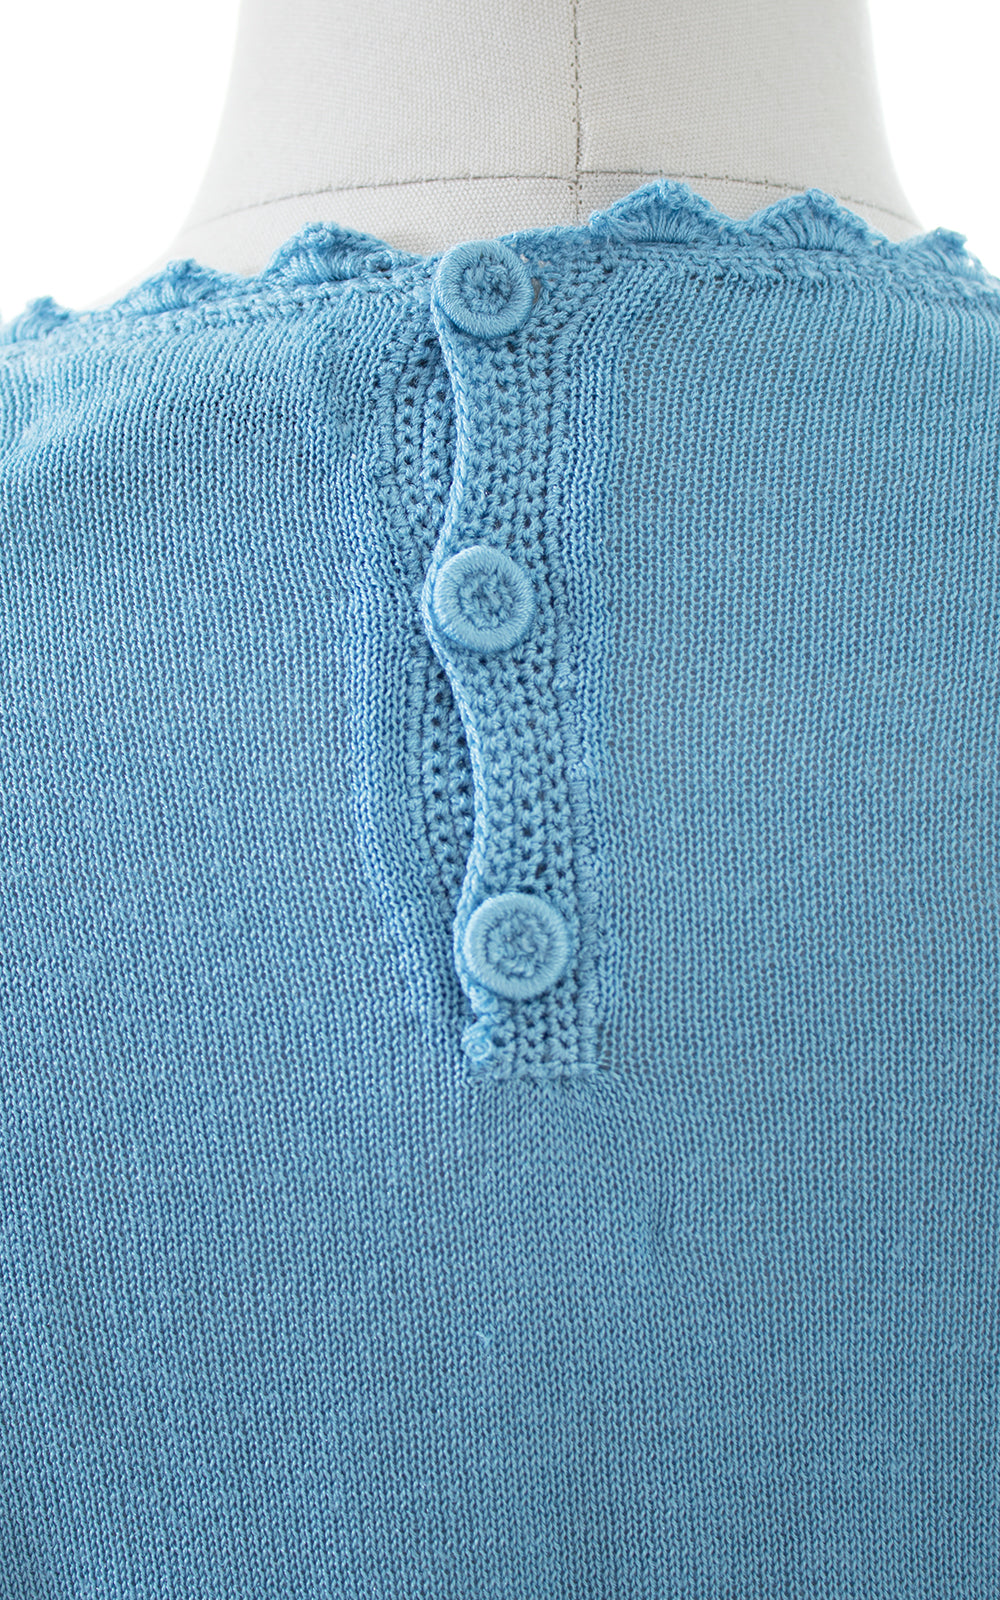 1960s Open Knit Sweater Top